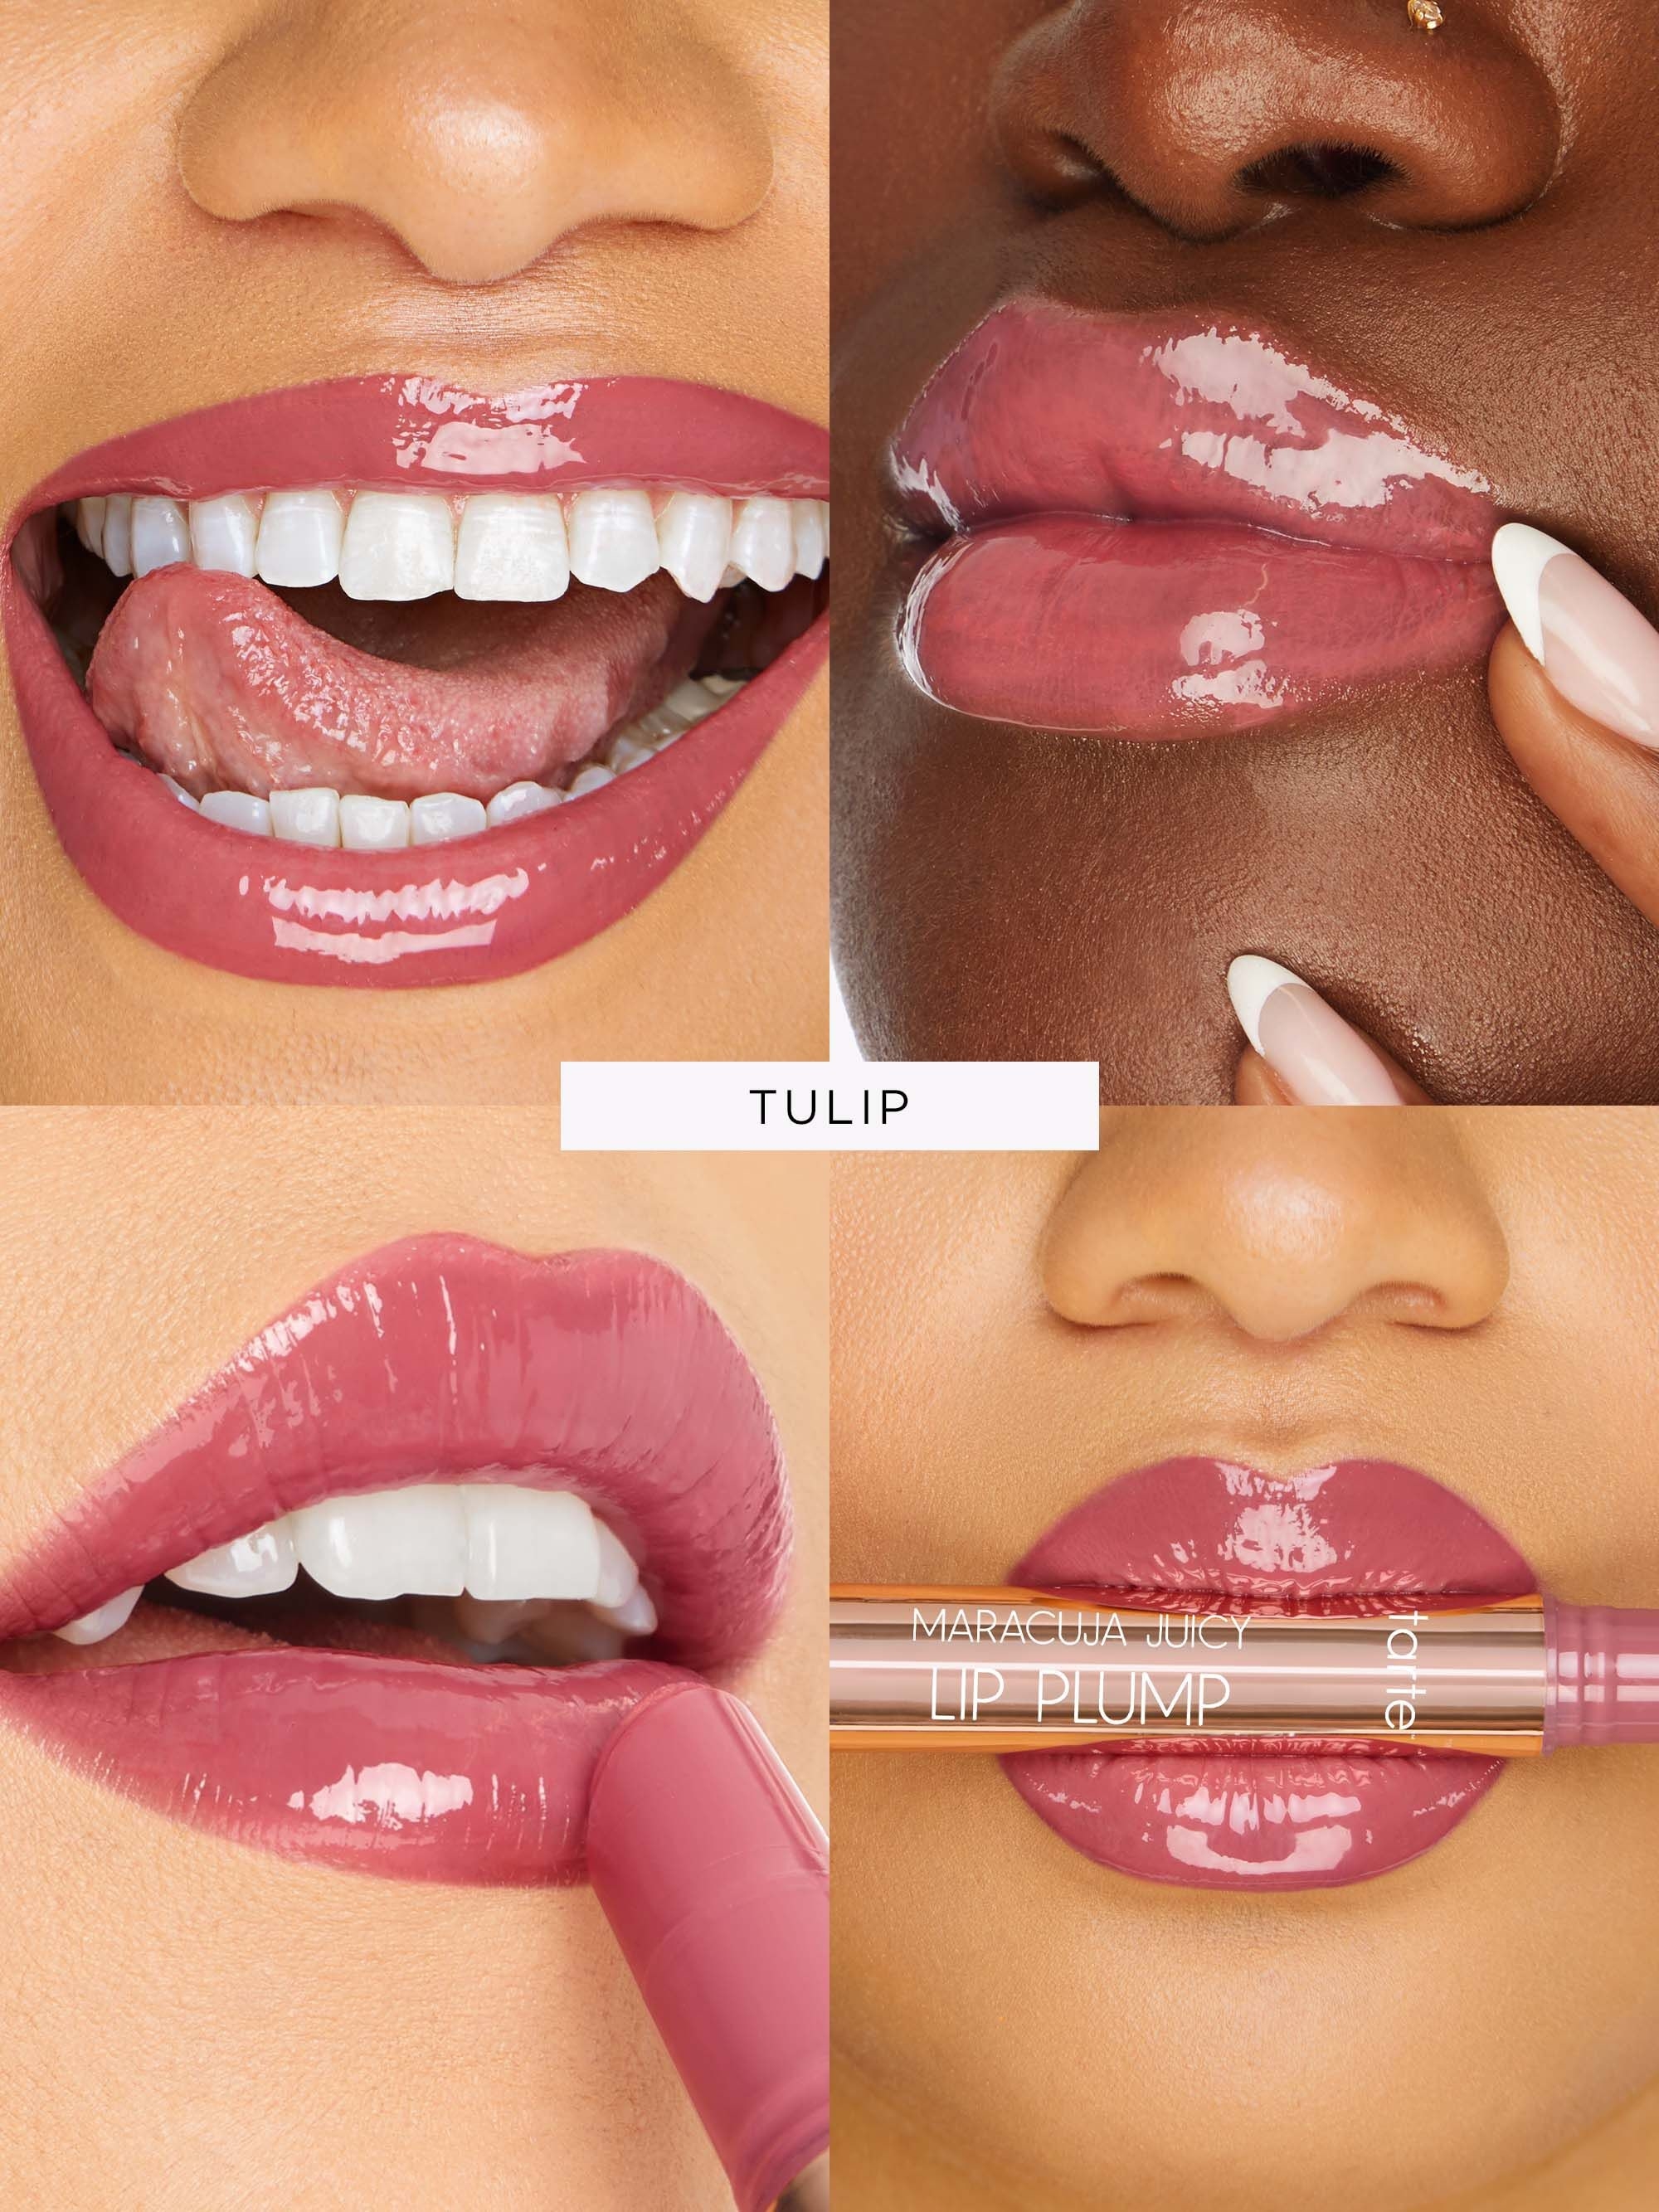 Models with different skintone wearing the lip plumper